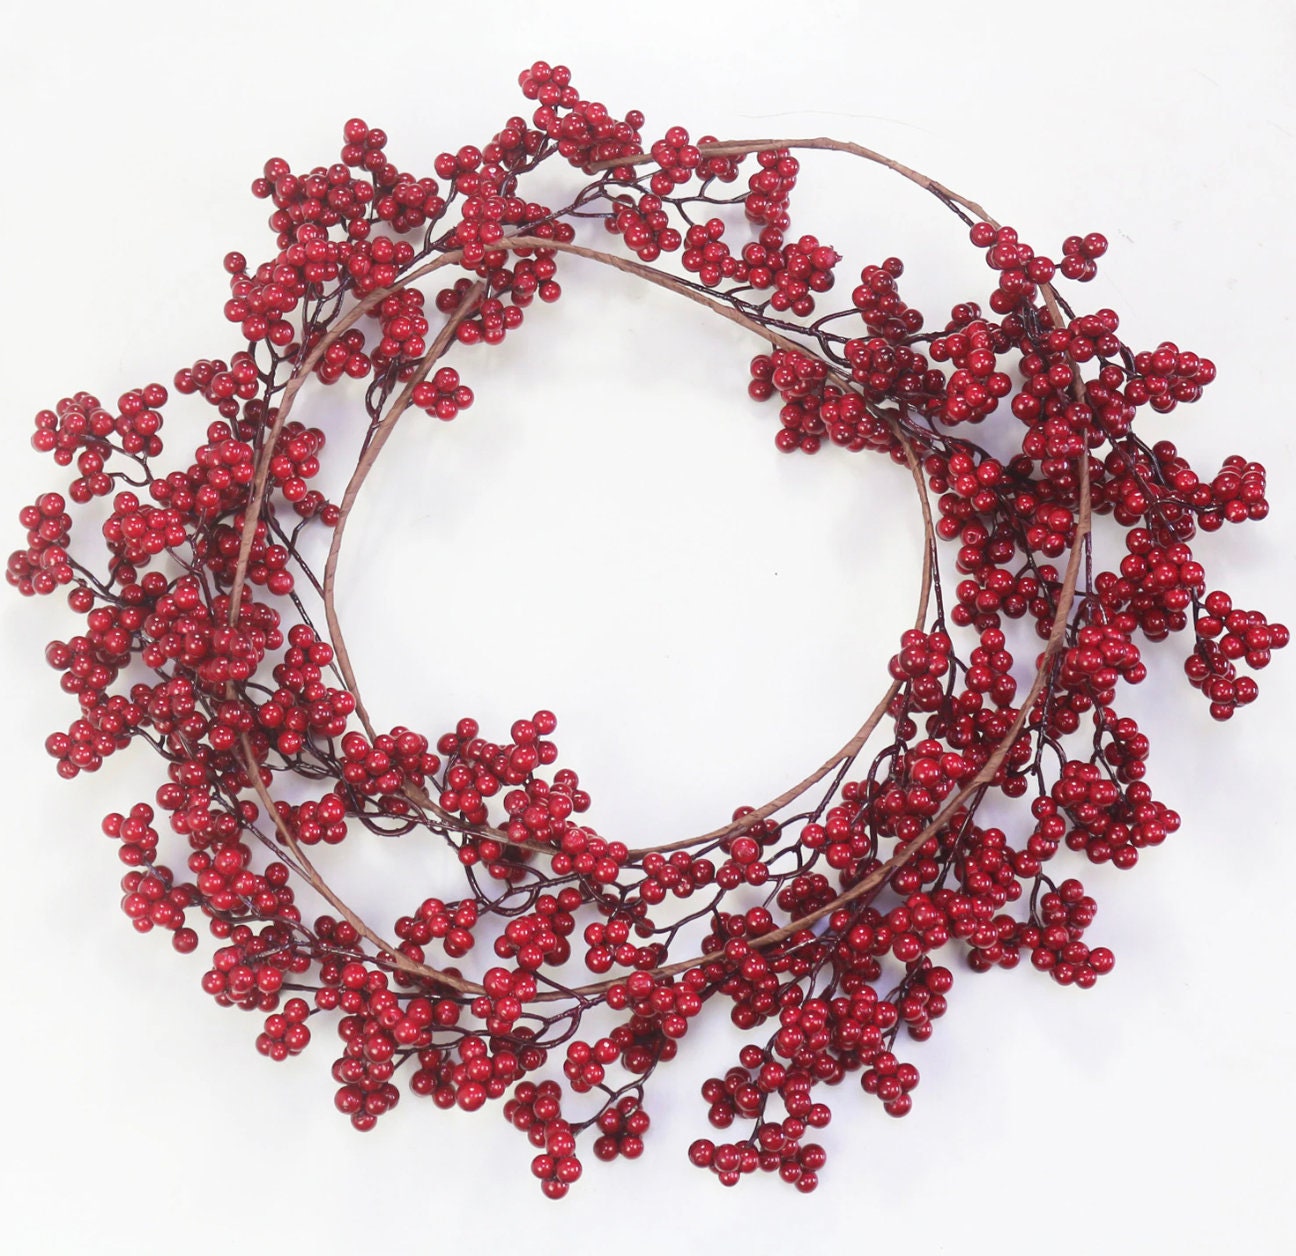 5.9 FT. Faux Red Berry Christmas Garland FREE LED Lights Holiday Garland Tree Decorations Primitive Old Decor Mantle Fireplace Decorations